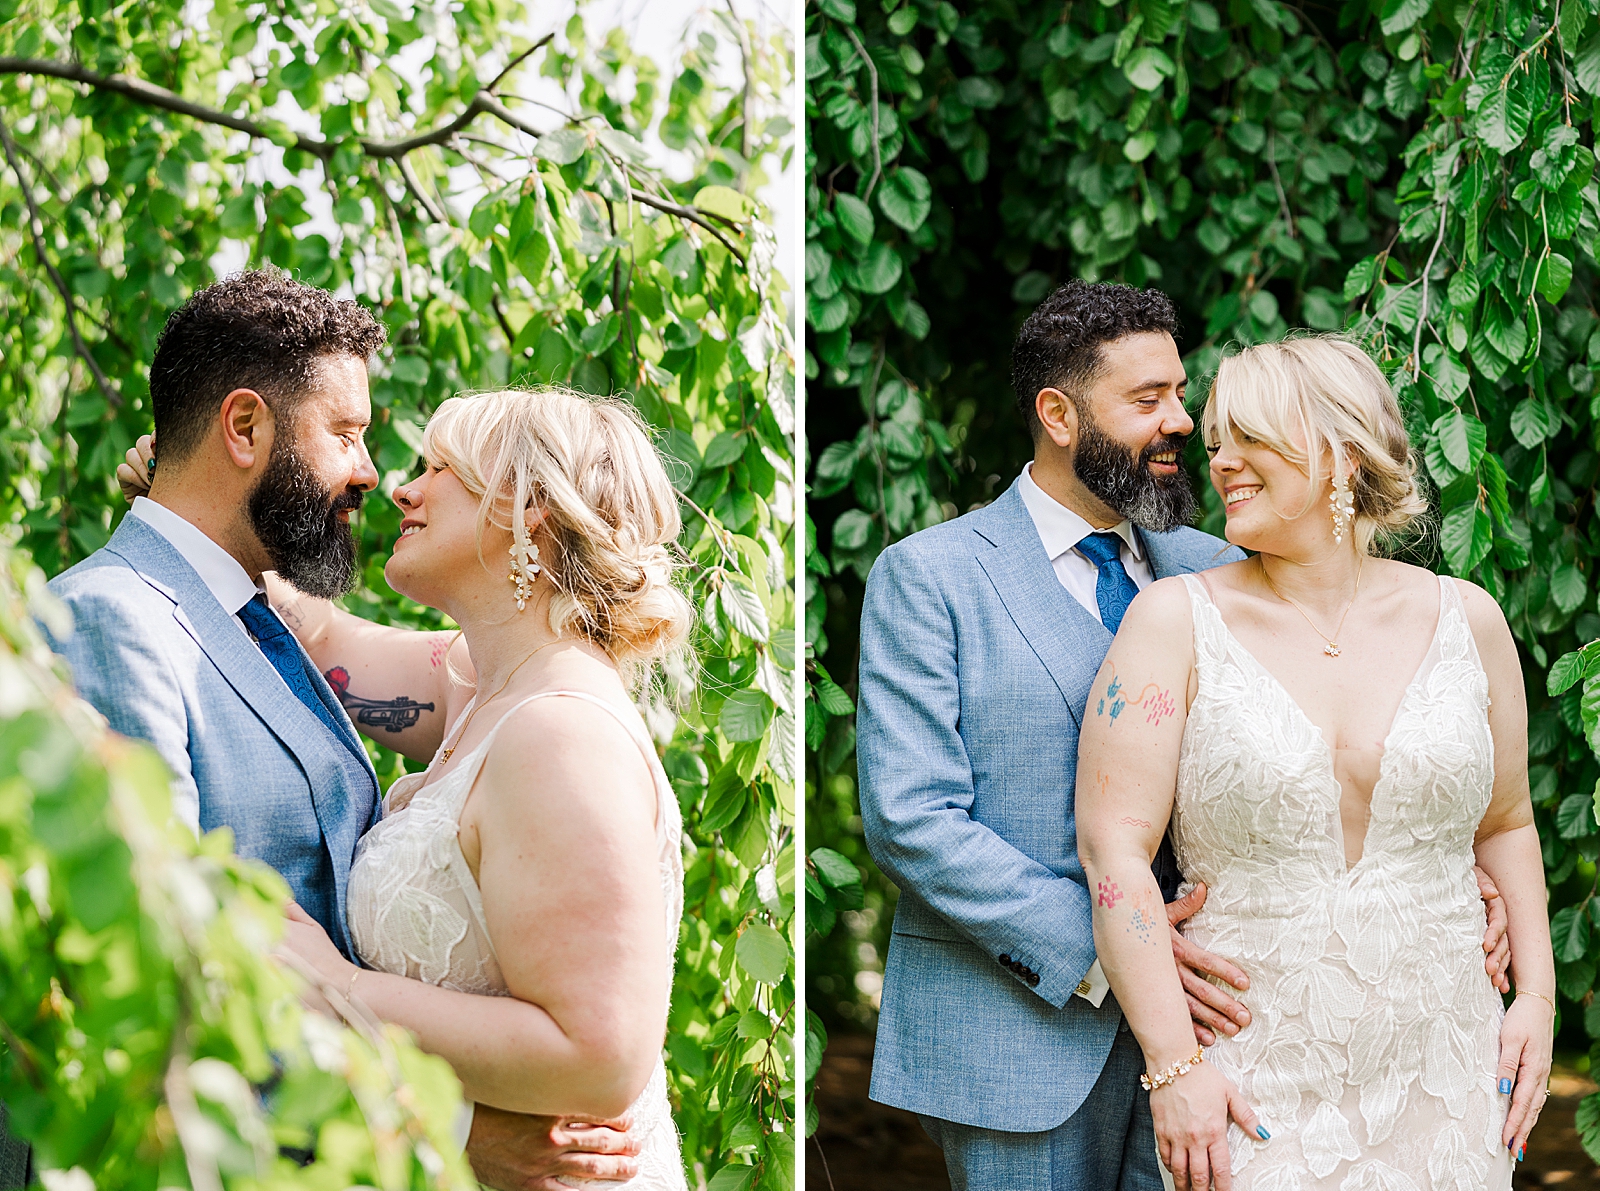 Left: Shot of MK and Eliseo embracing in front of lush branches.
Right: Shot of MK and Eliseo smiling in front of lush branches. 